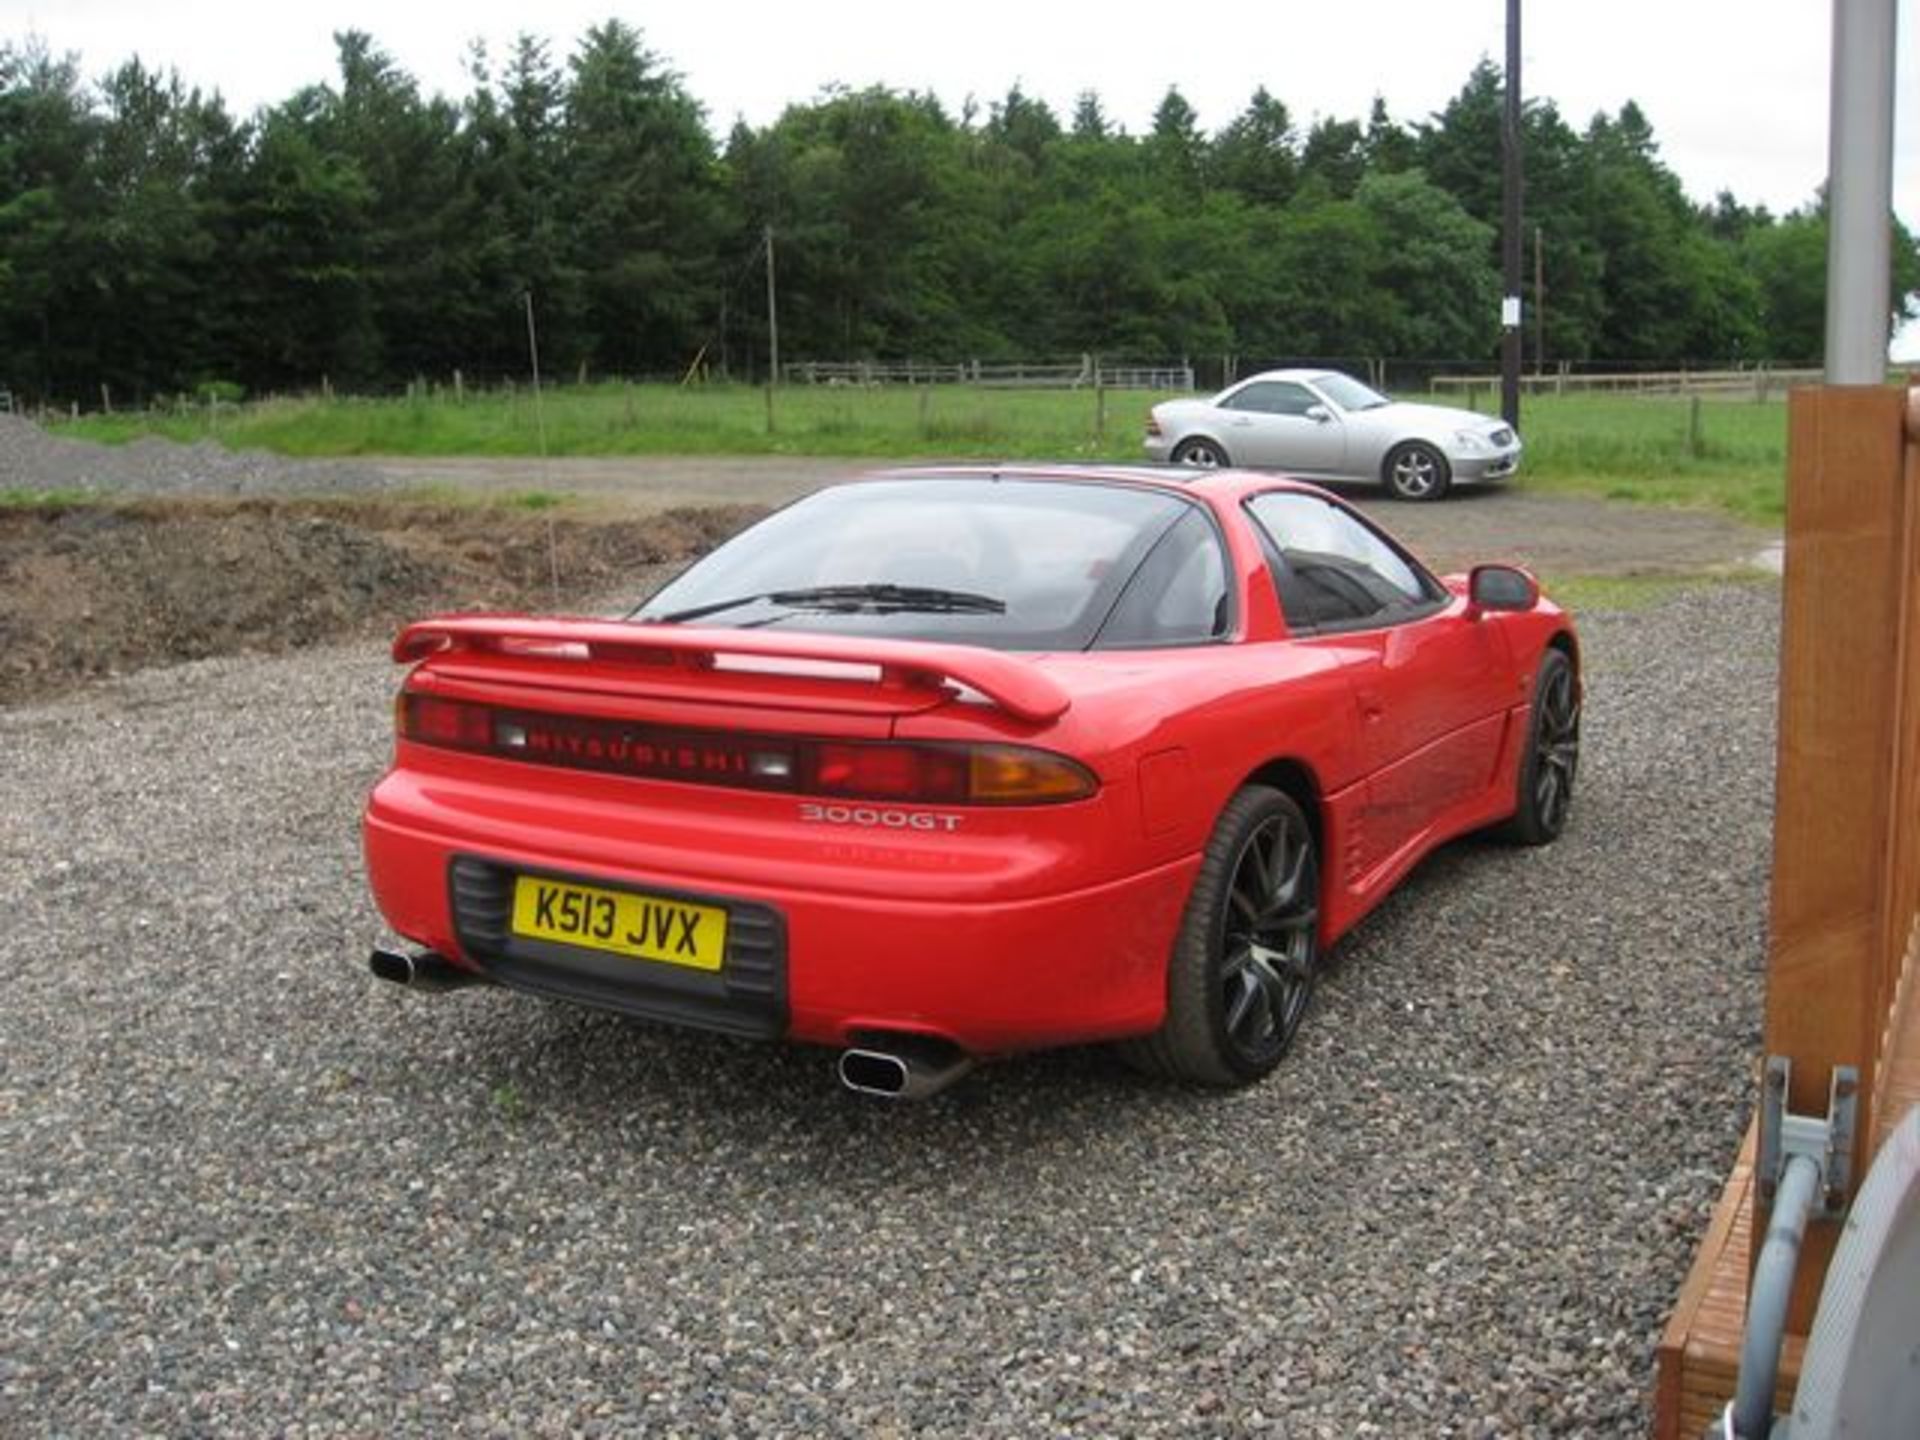 MITSUBISHI, 3000 GT V6 TURBO - 2972cc, Chassis number JMAMNZ16APY000228 - presented with an - Image 5 of 17